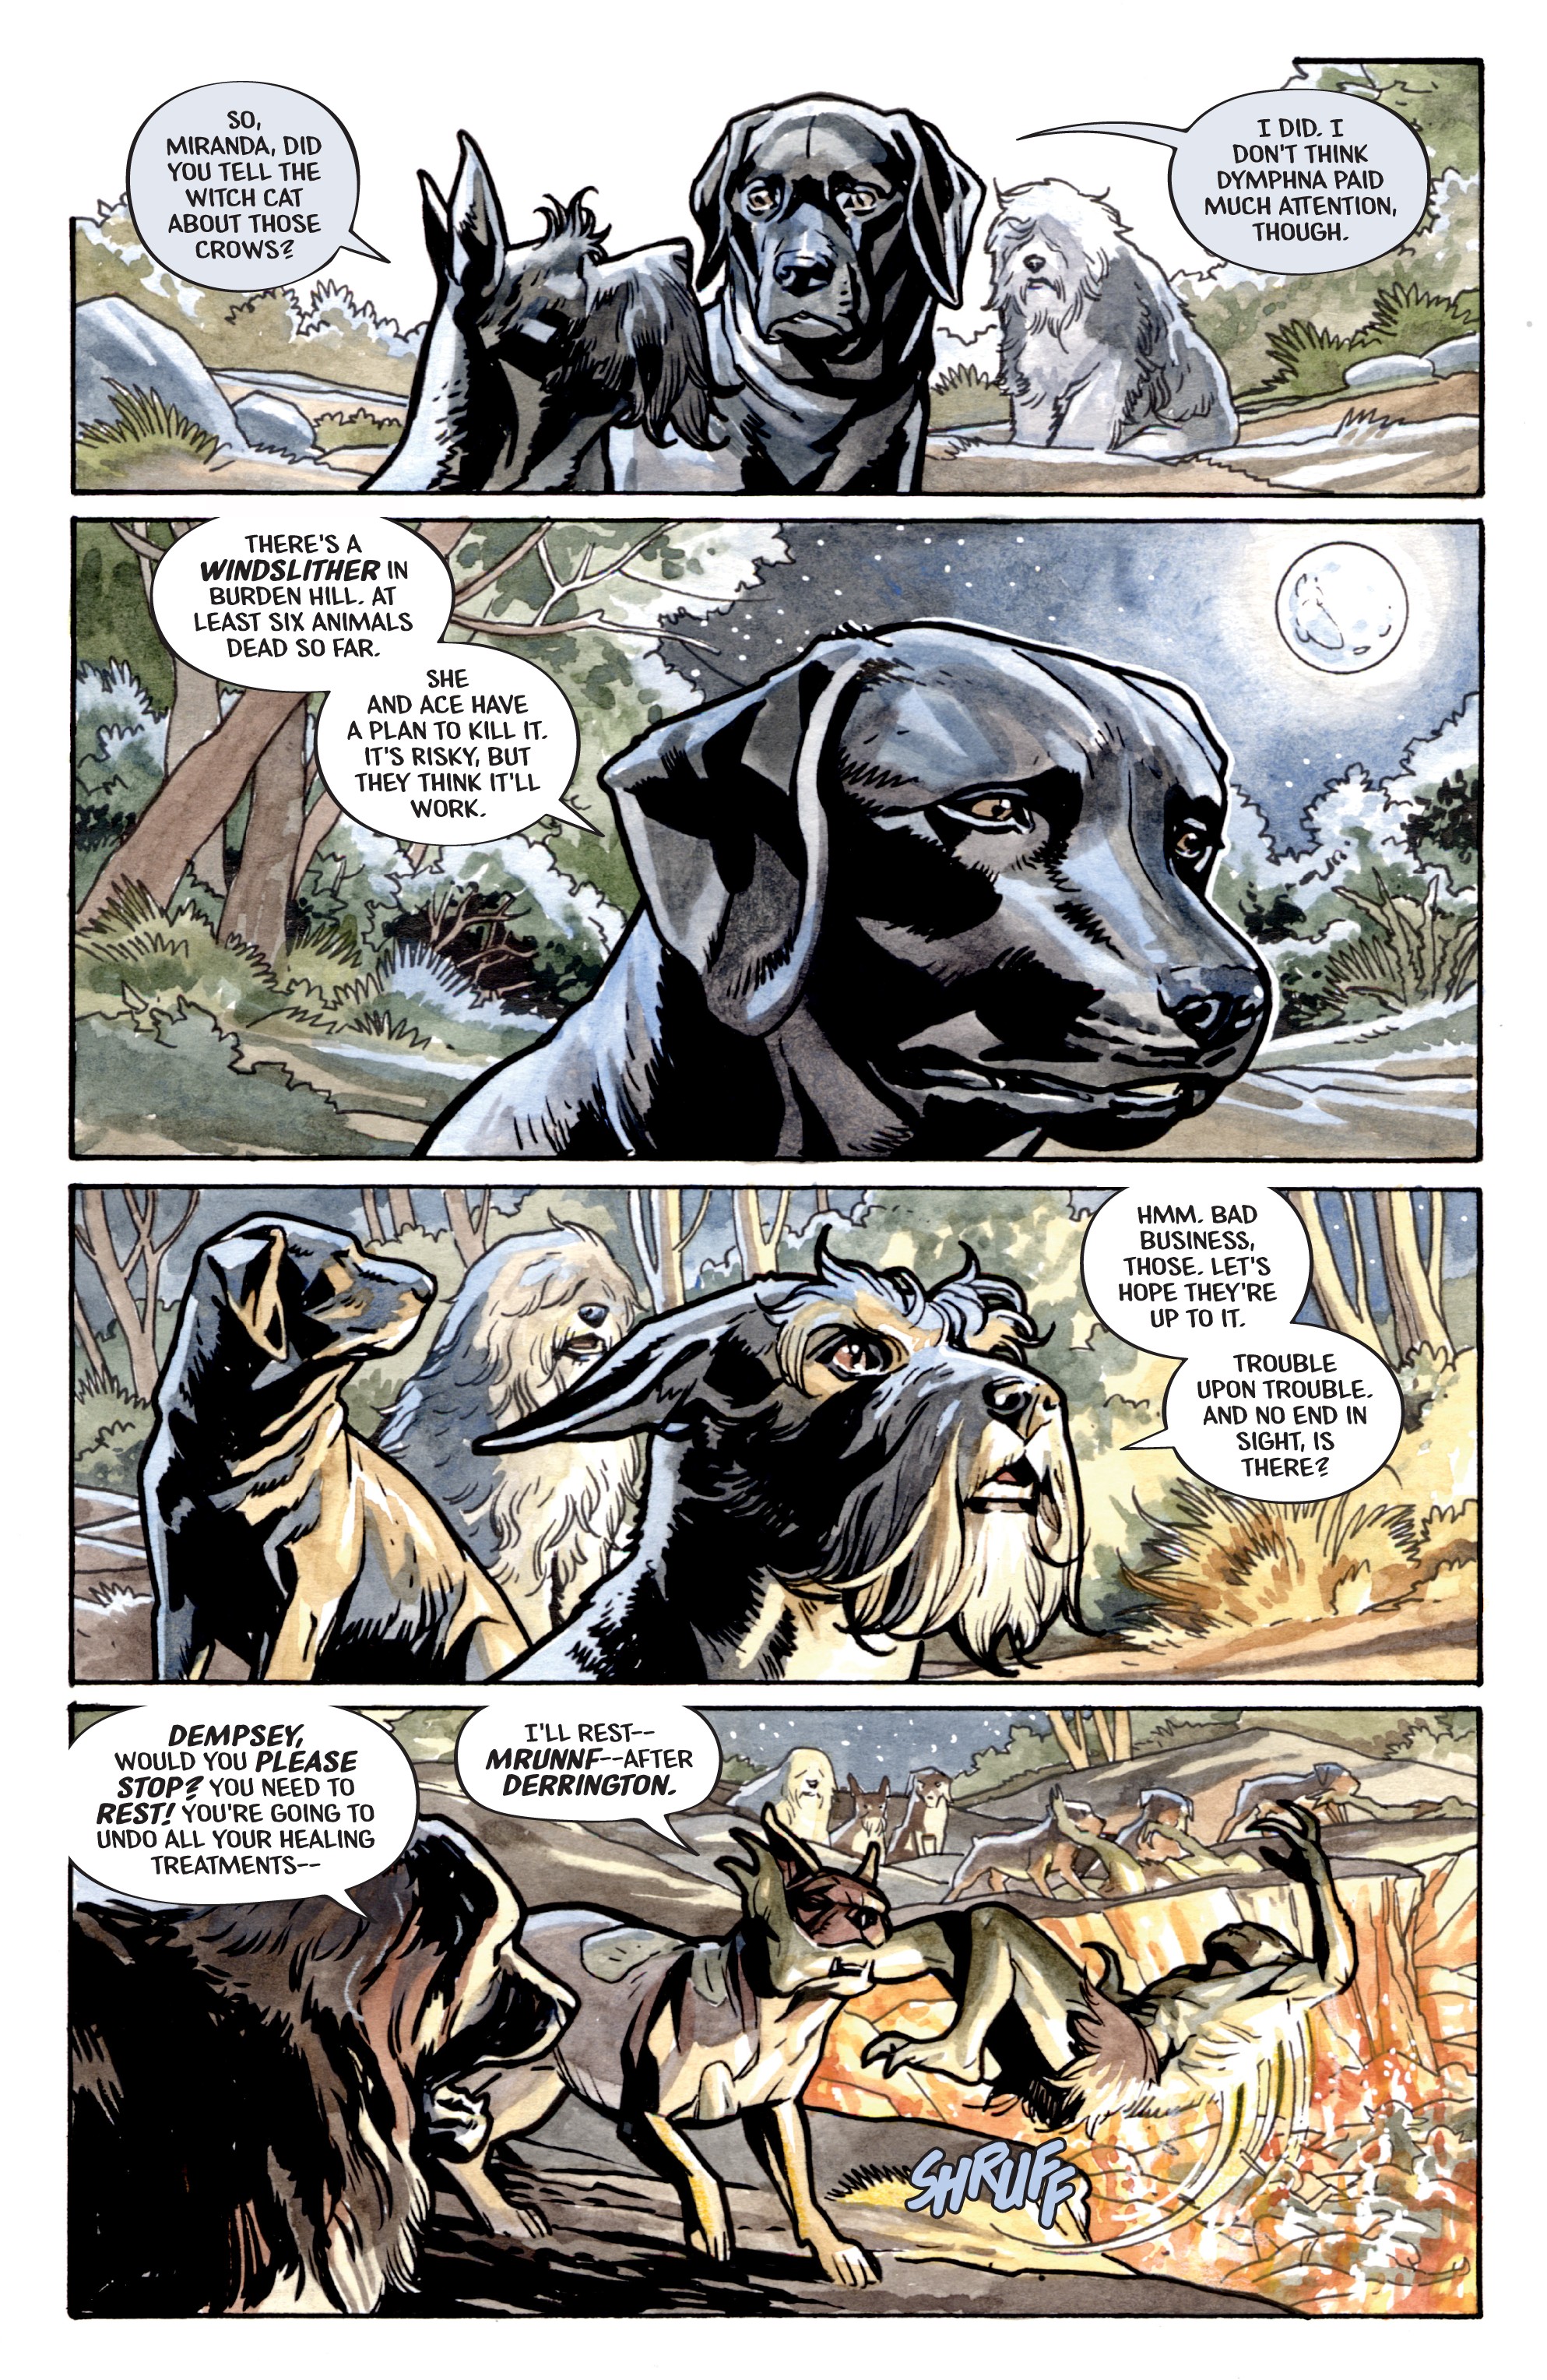 Beasts of Burden: Wise Dogs and Eldritch Men  (2018-): Chapter 2 - Page 4